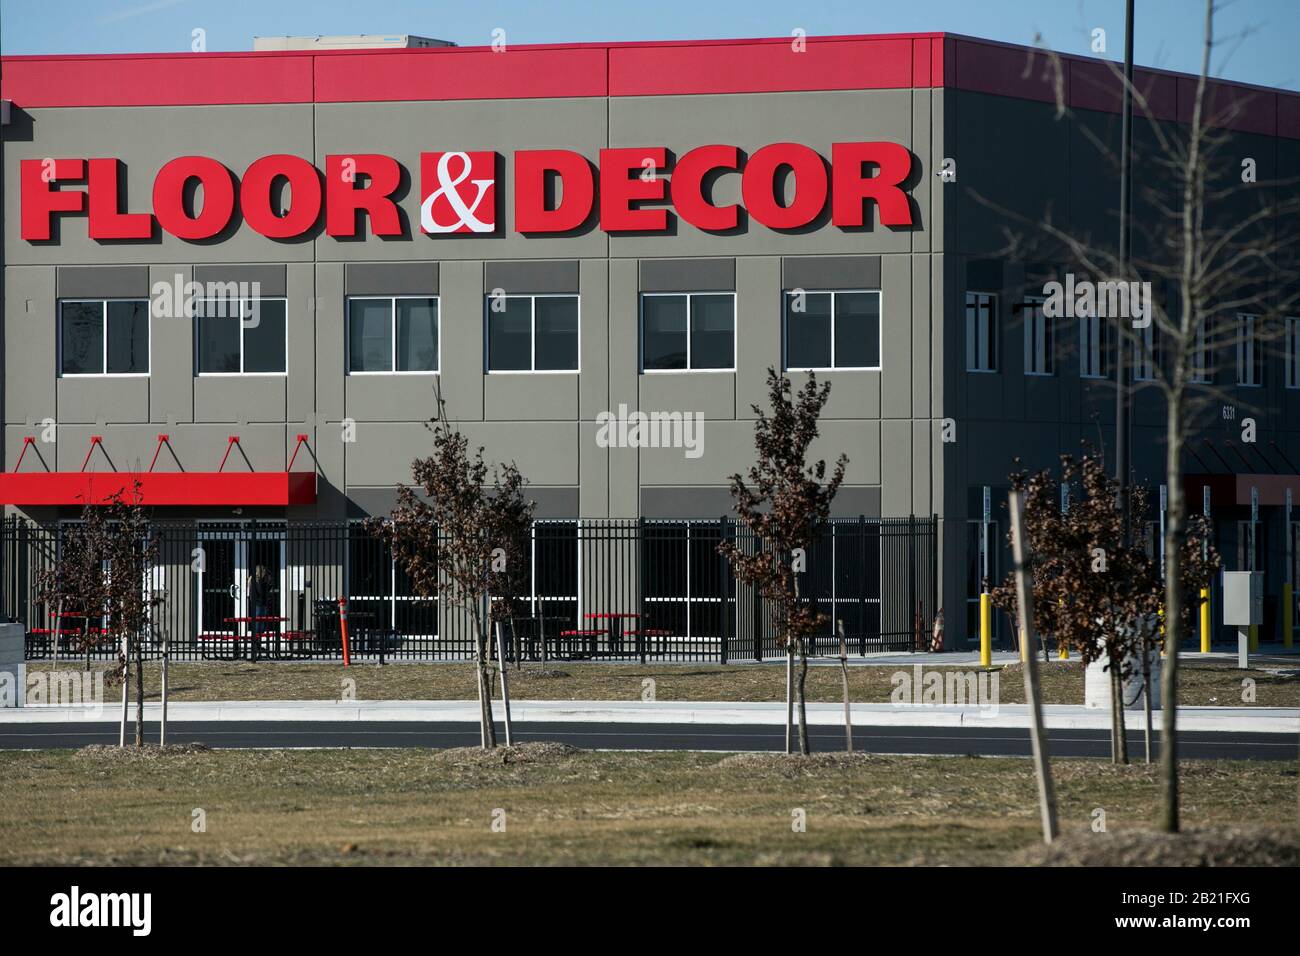 A logo sign outside of a Floor & Decor fulfillment center in Baltimore, Maryland on February 22, 2020. Stock Photo